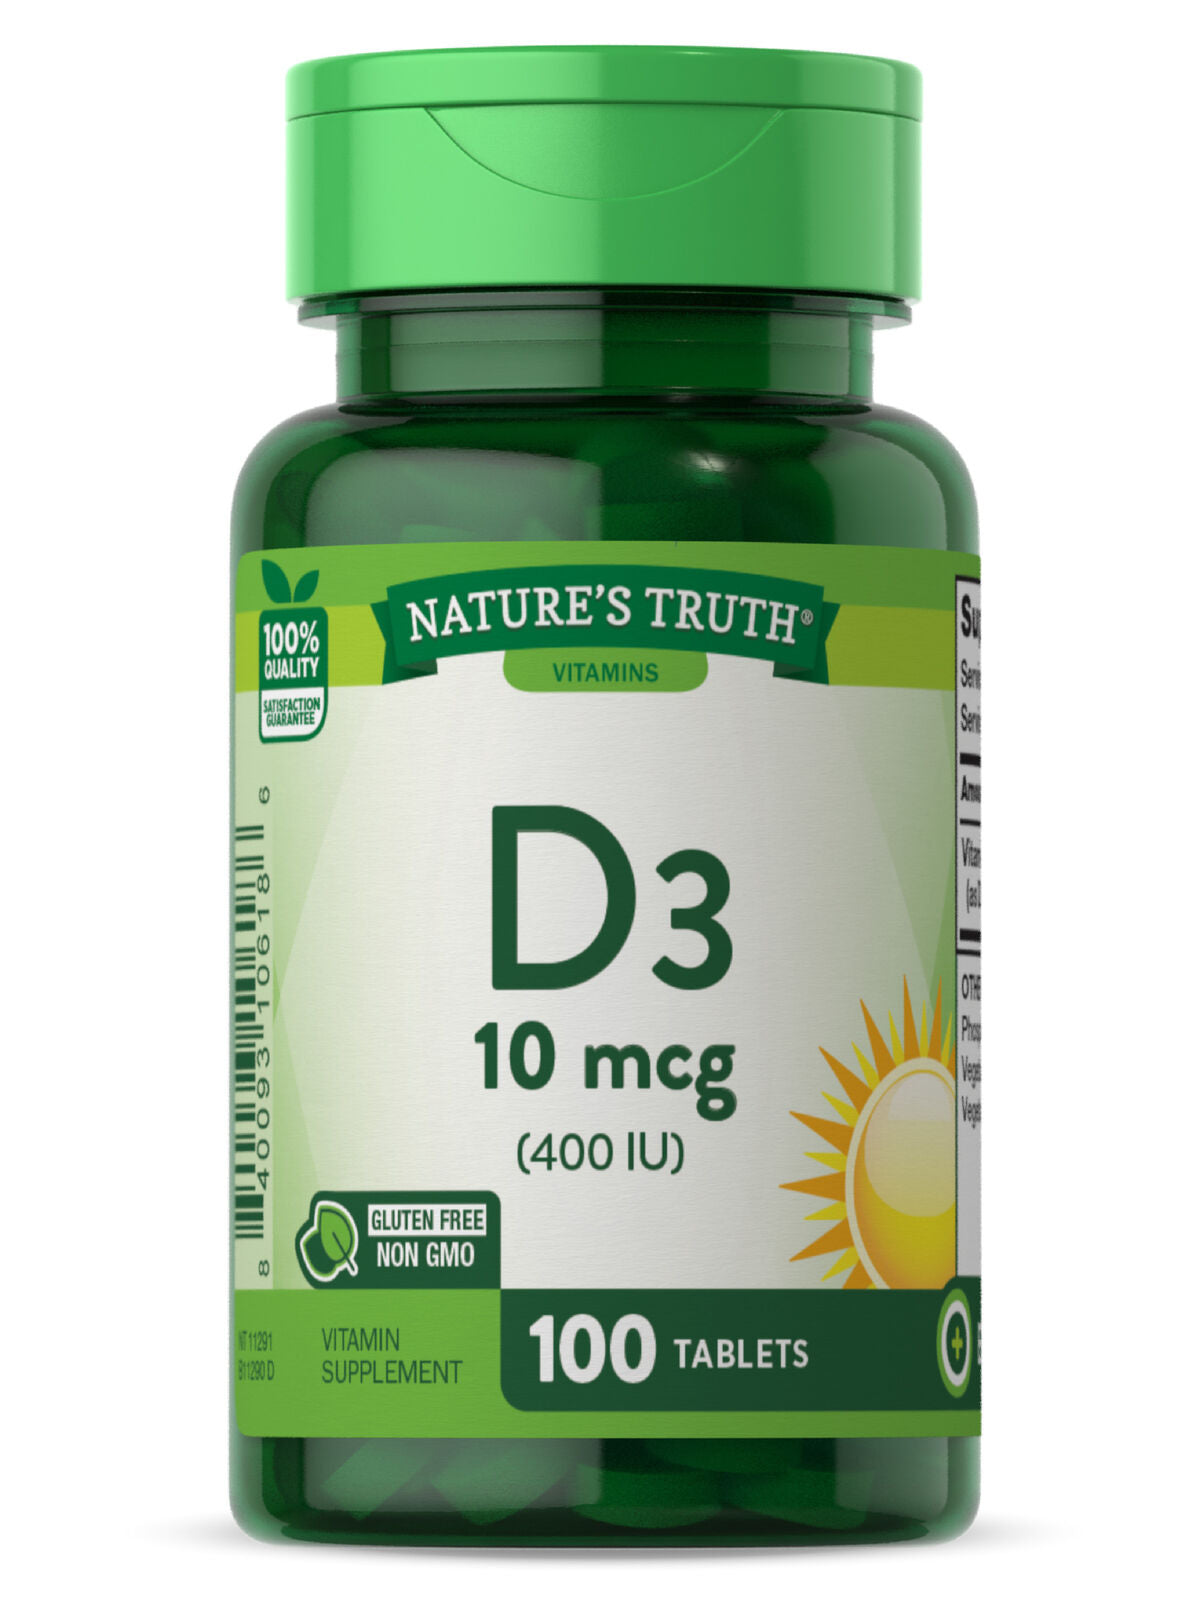 Nature's Truth Vitamin Supplement D3 400 IU Gluten Free Tablets 10 mcg 100 Count